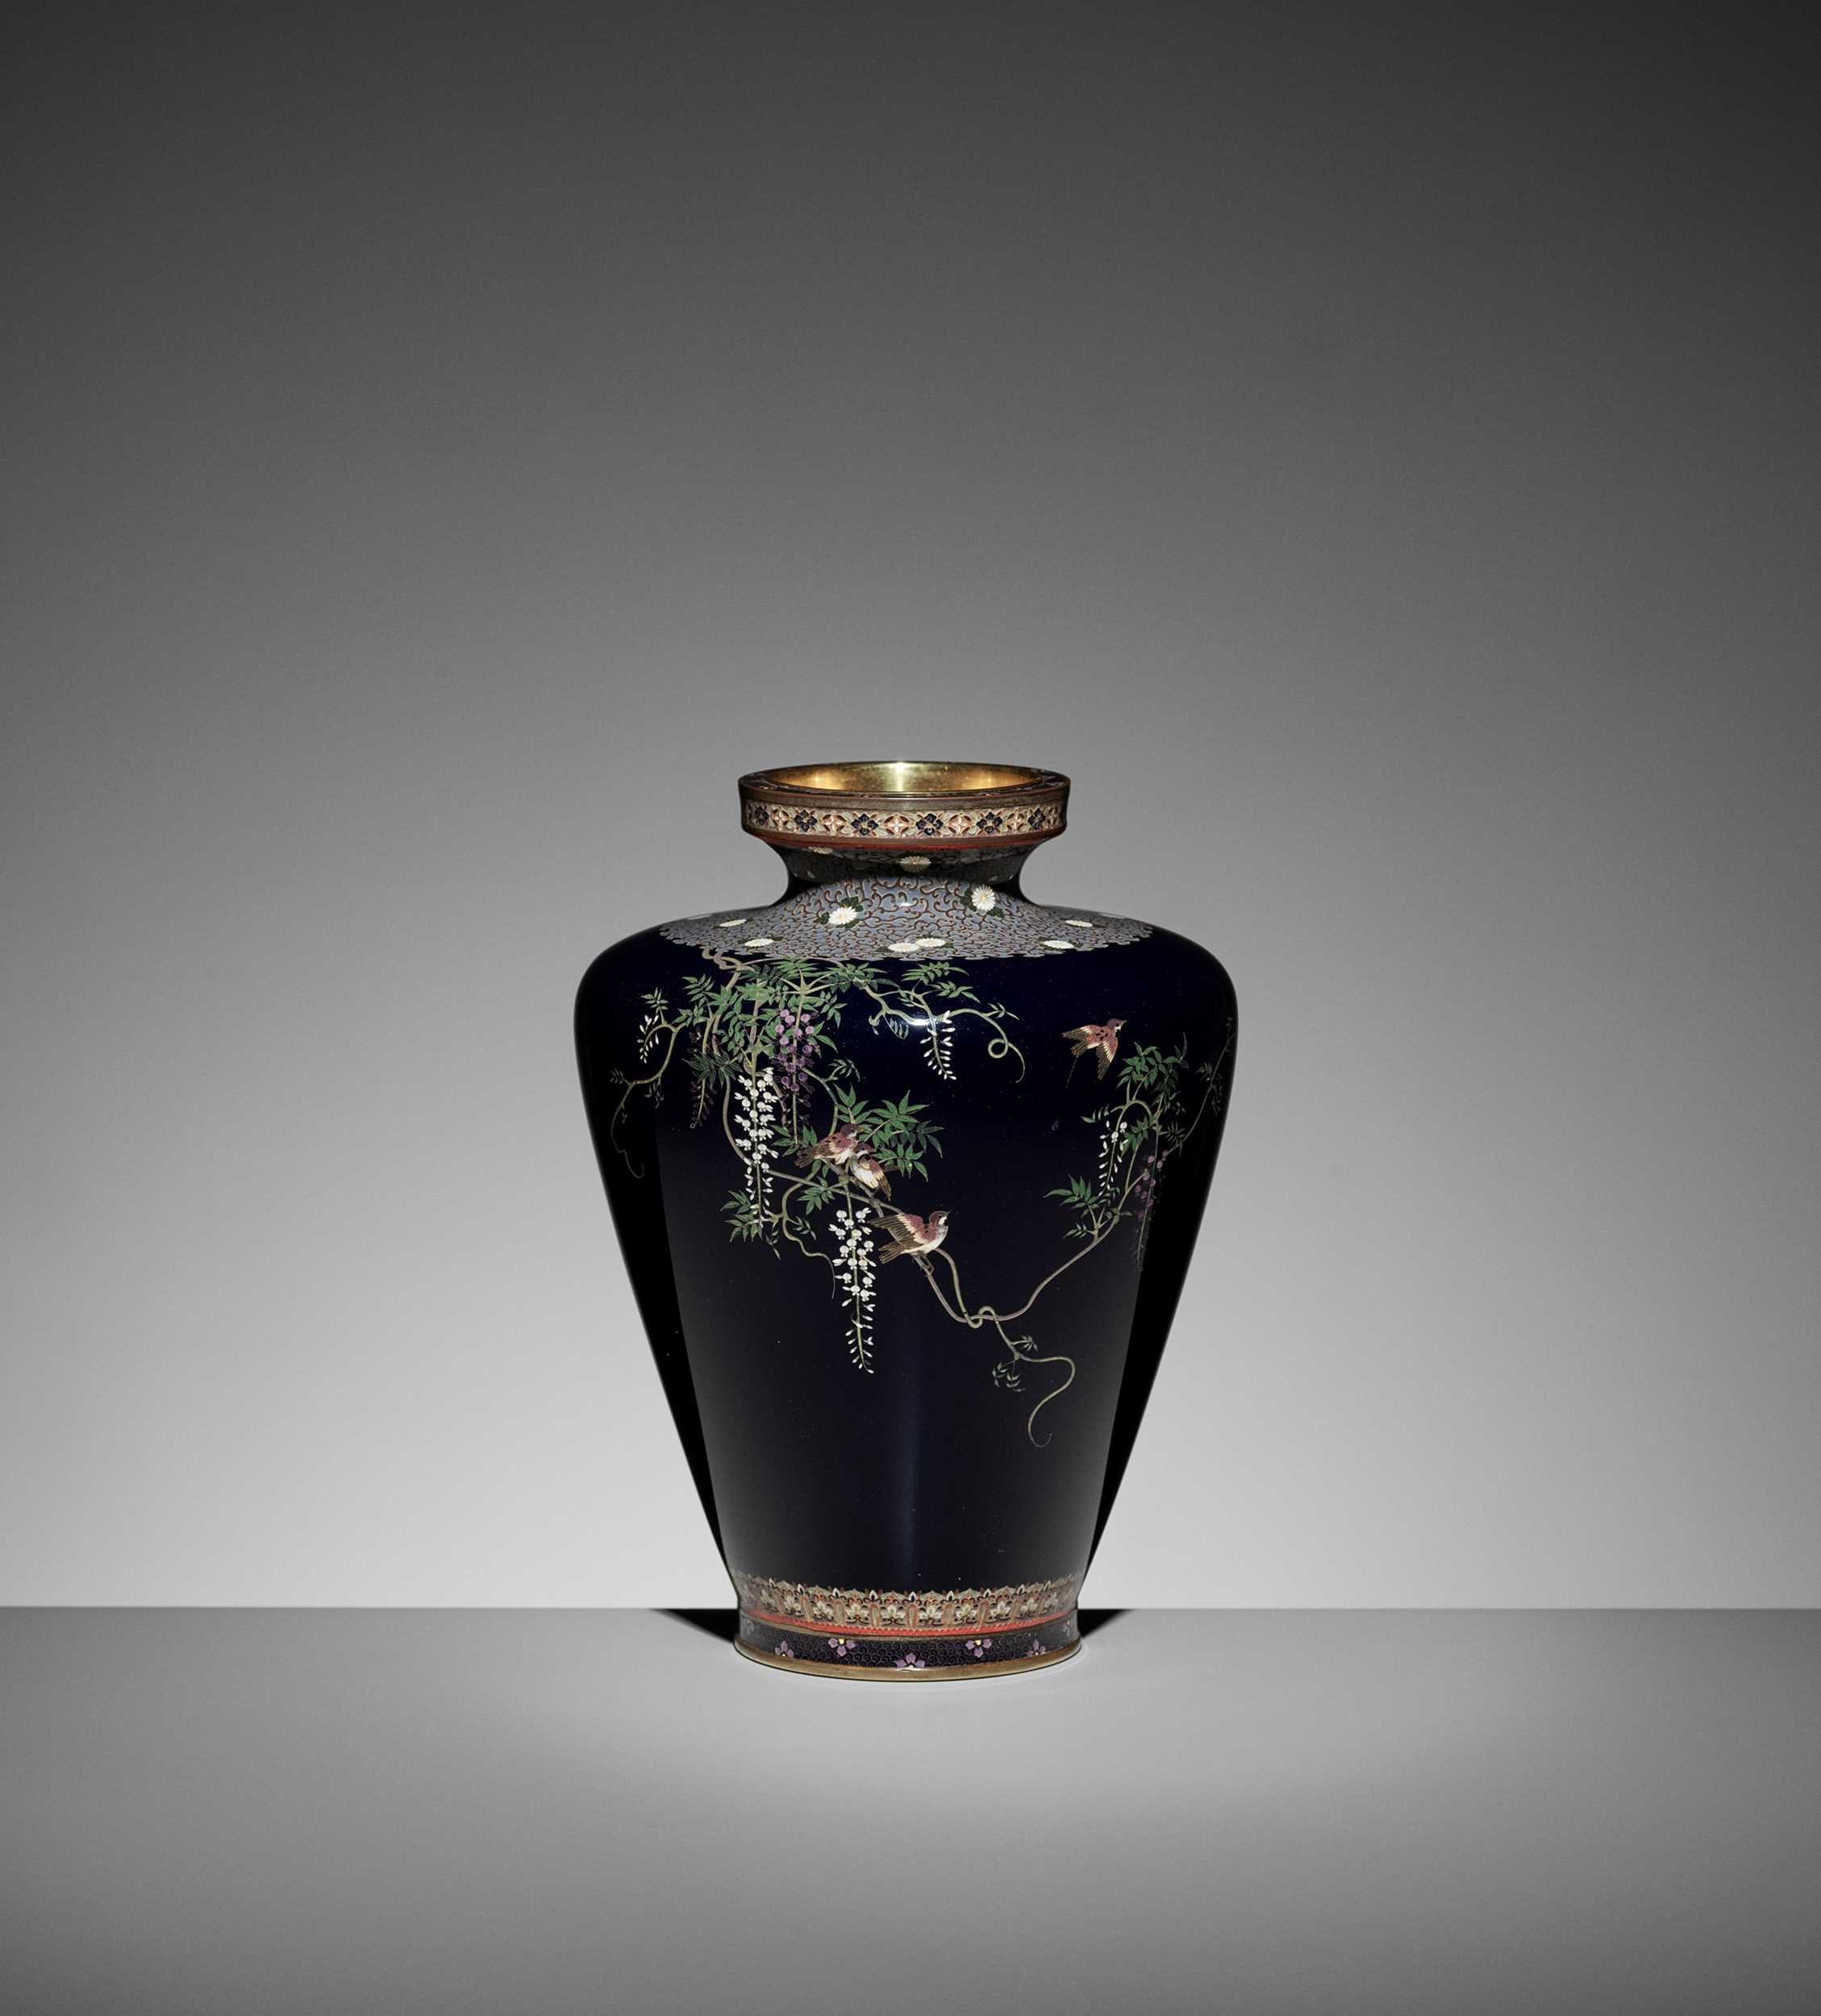 A FINE CLOISONNÉ ENAMEL VASE WITH SPARROWS AND WISTERIA, ATTRIBUTED TO THE...